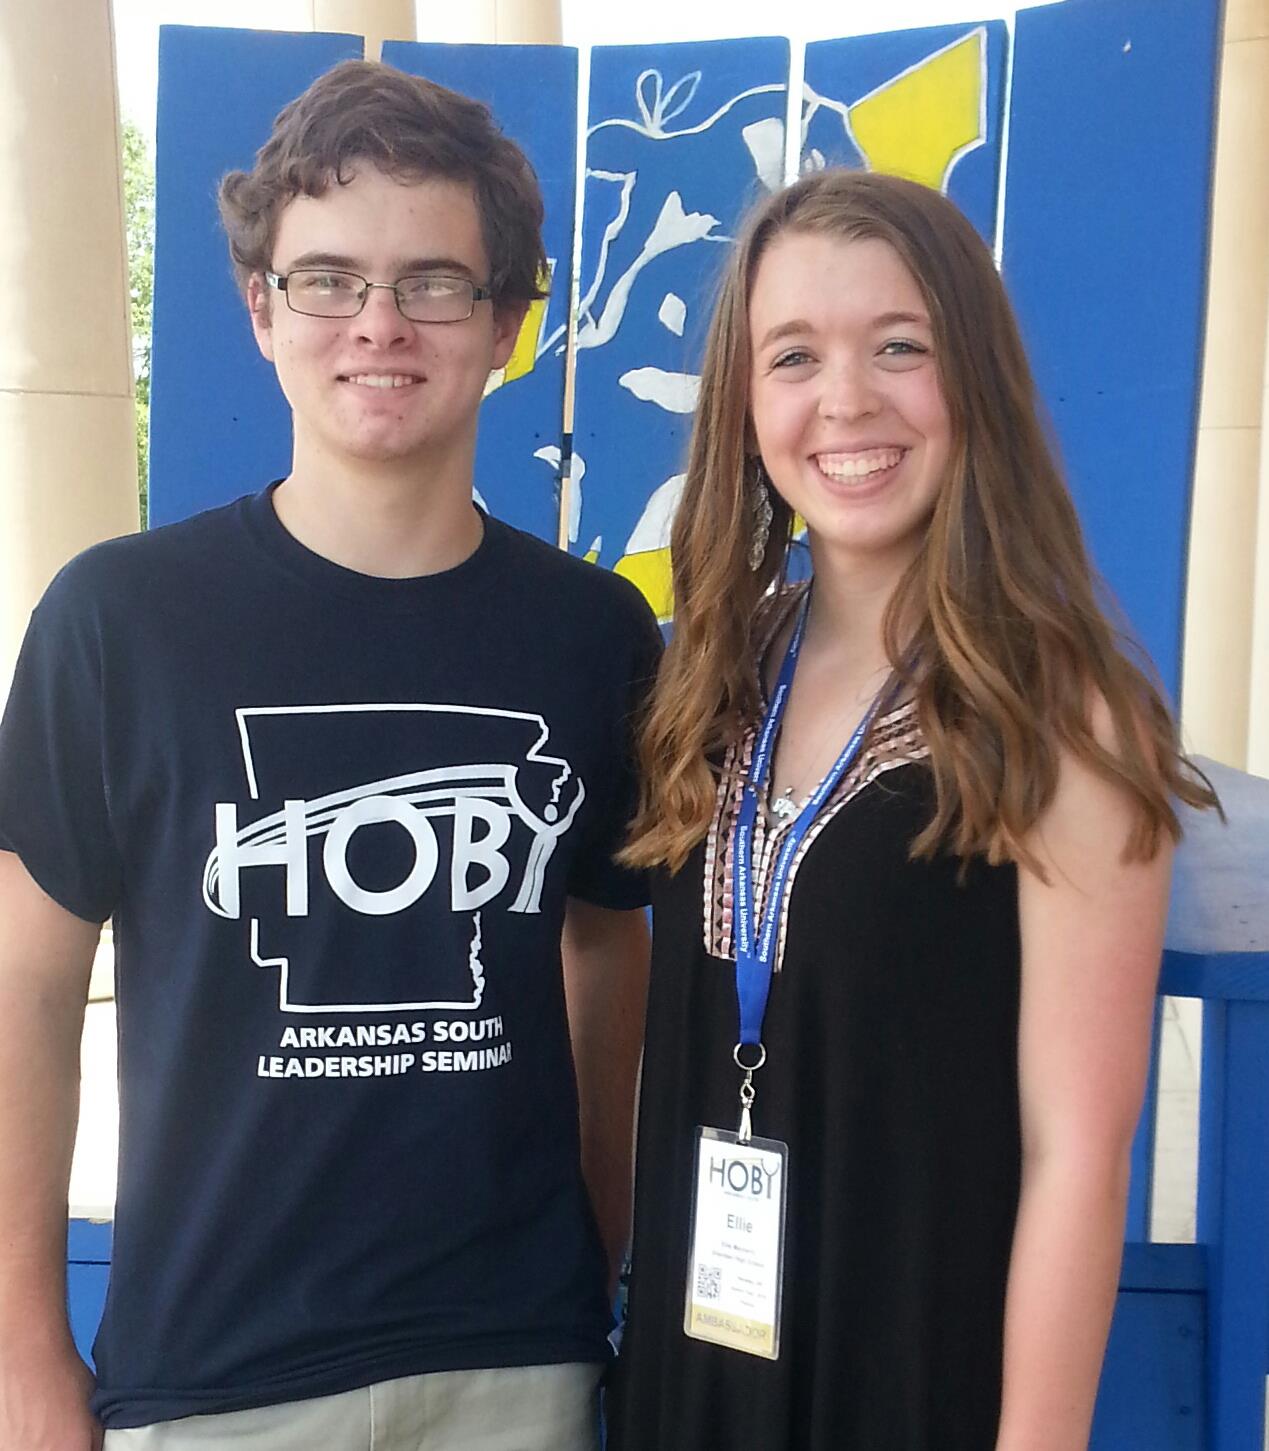 Students Ellie Mayberry and Curt Smead pose at HOBY convention